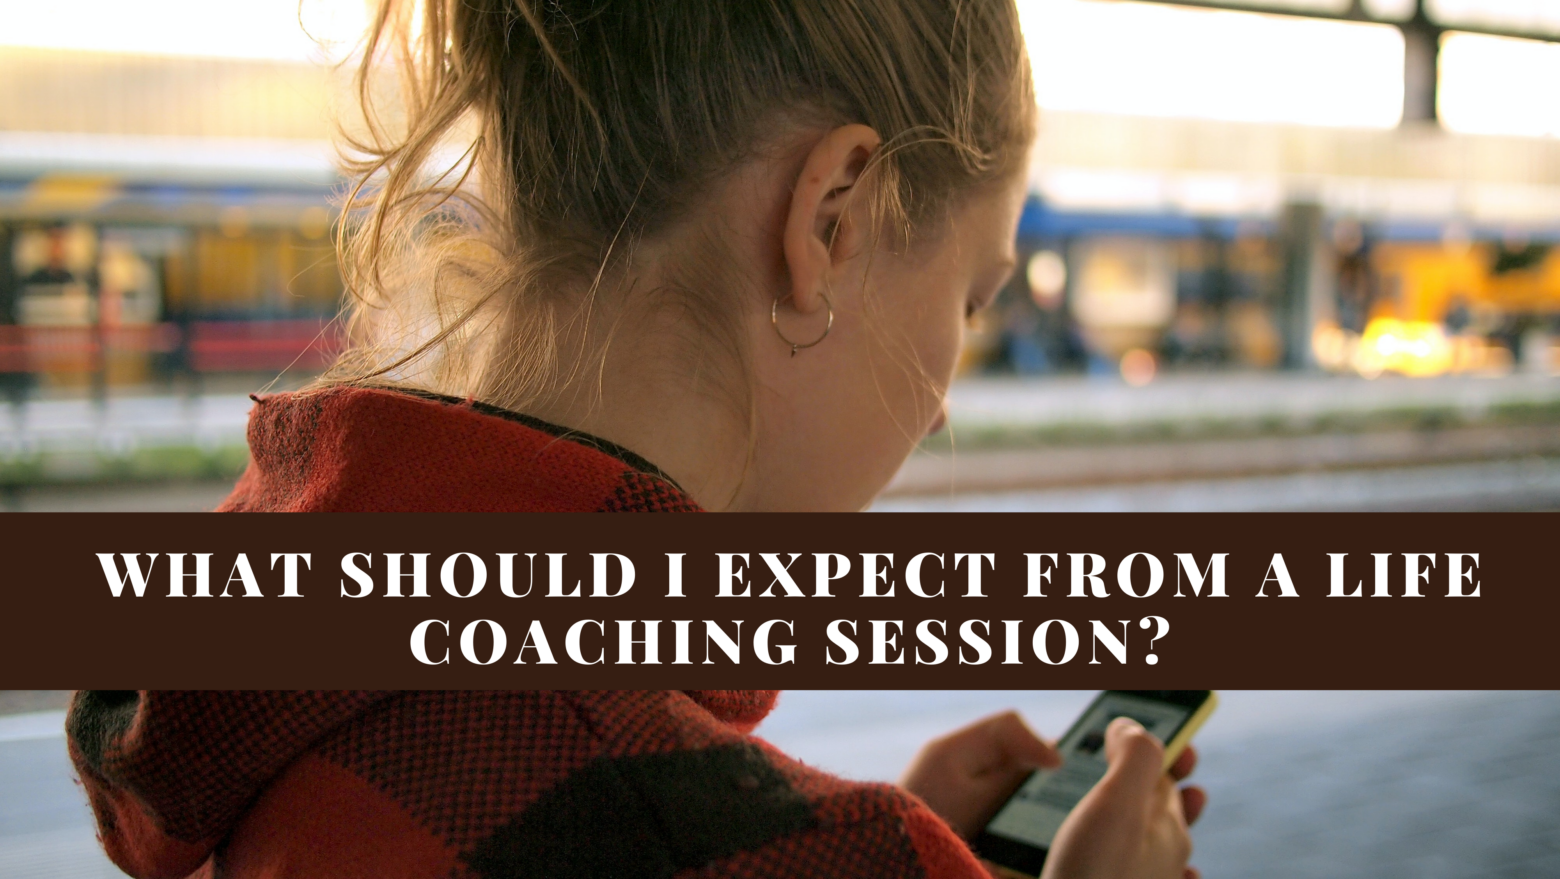 What Should I Expect From A Life Coaching Session?